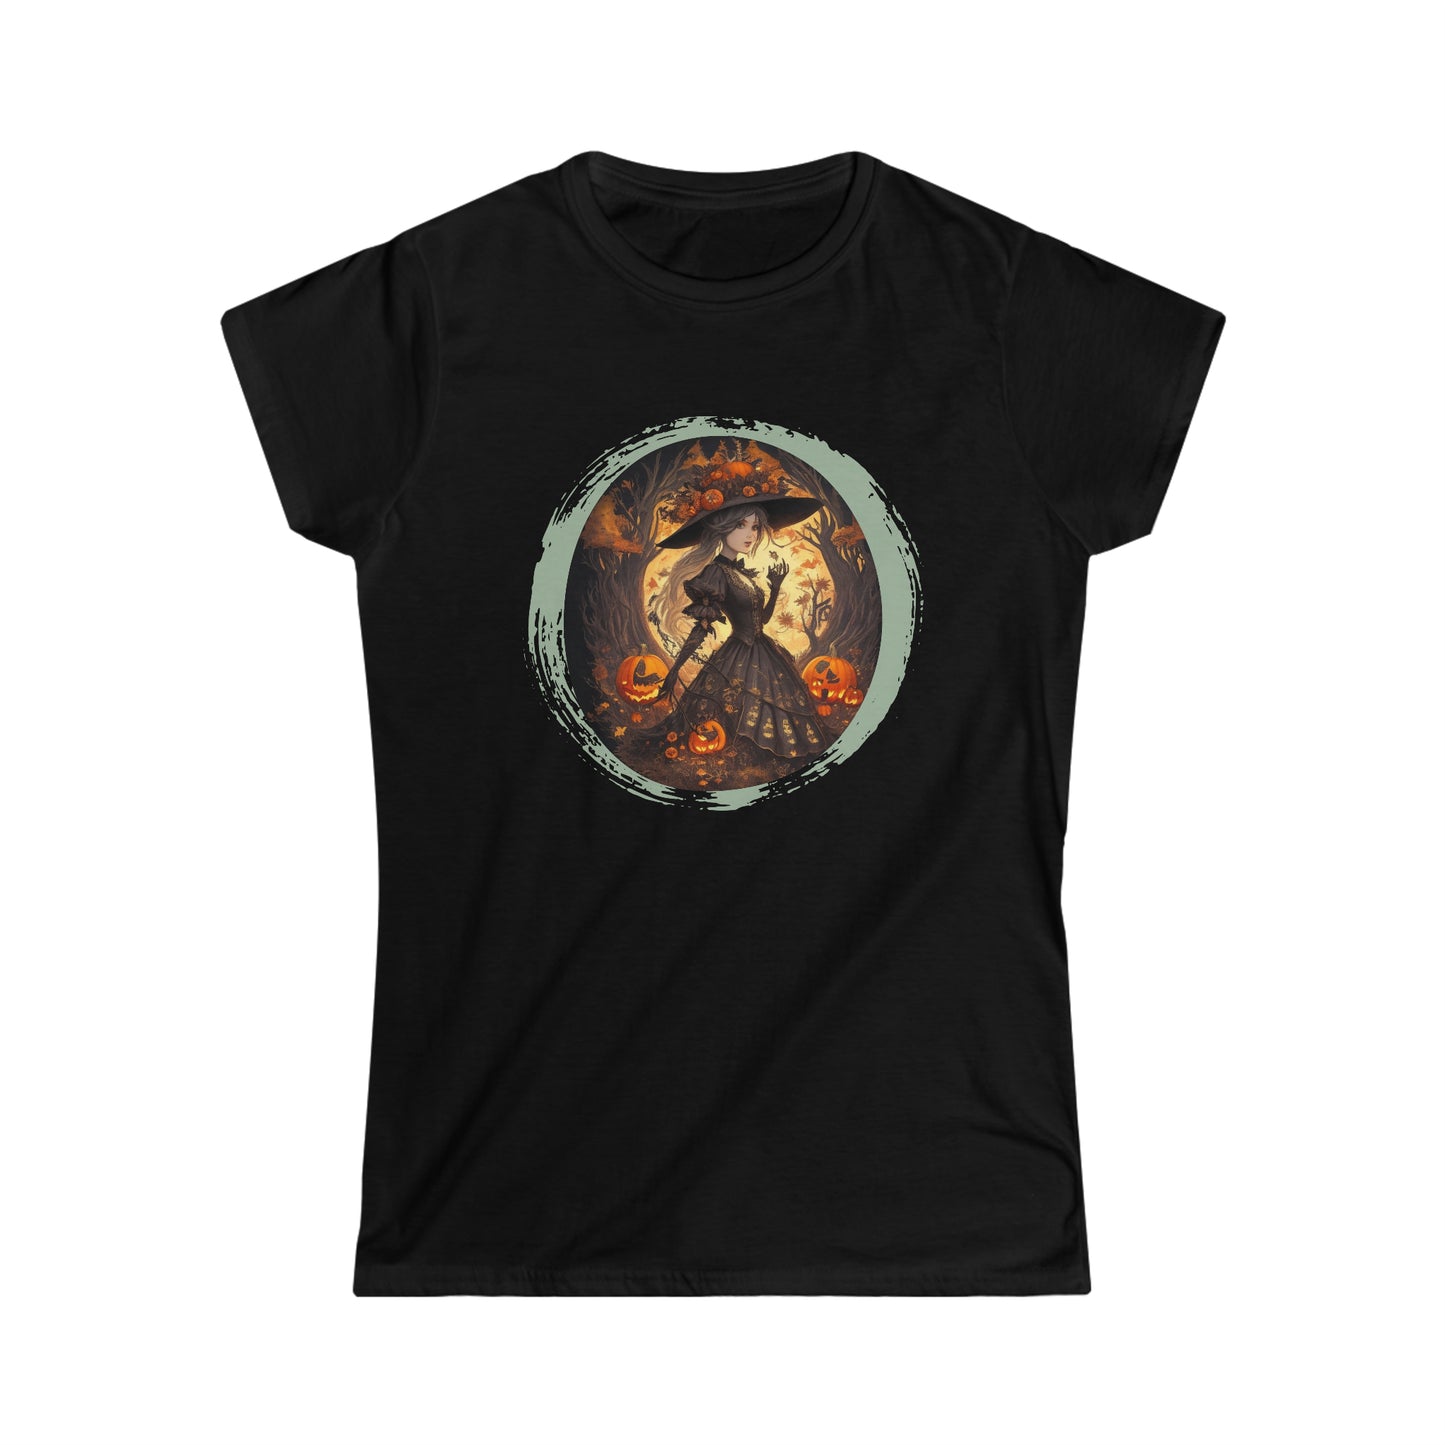 Women's Softstyle Tee - Halloween - Miss witch - 01